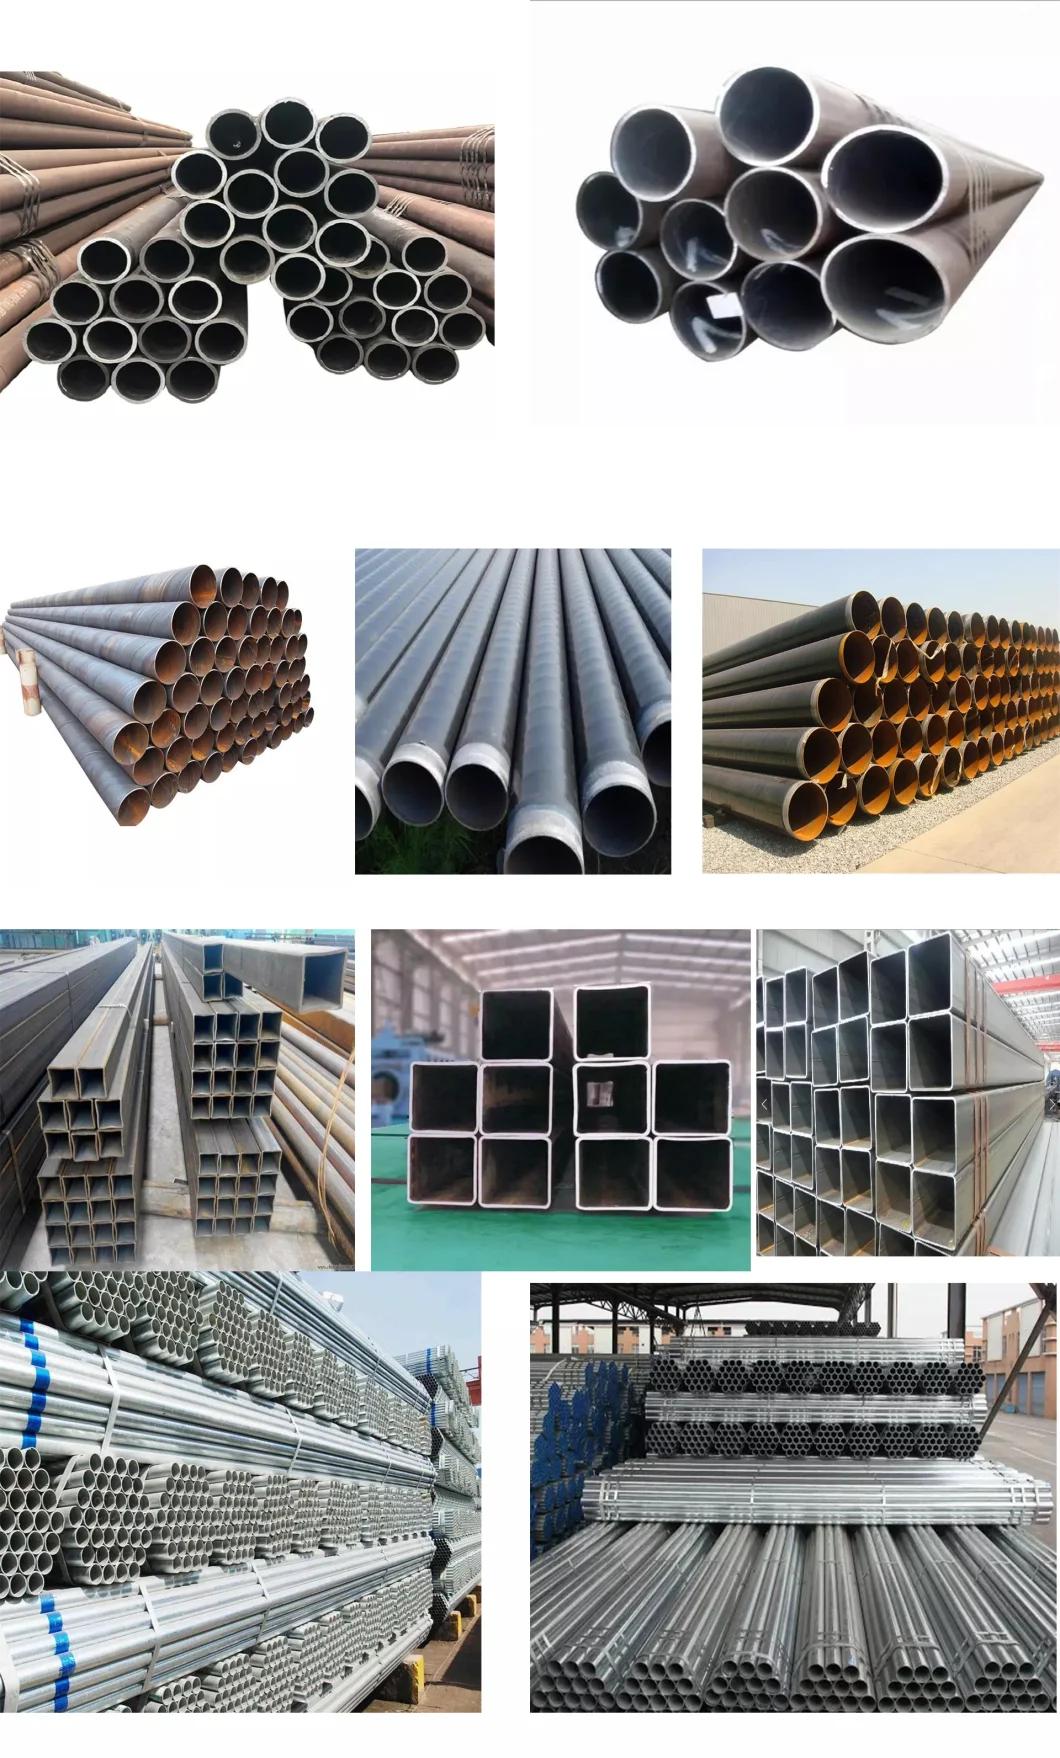 Oil and Gas Pipeline 20 Steel Seamless Carbon Steel Pipe